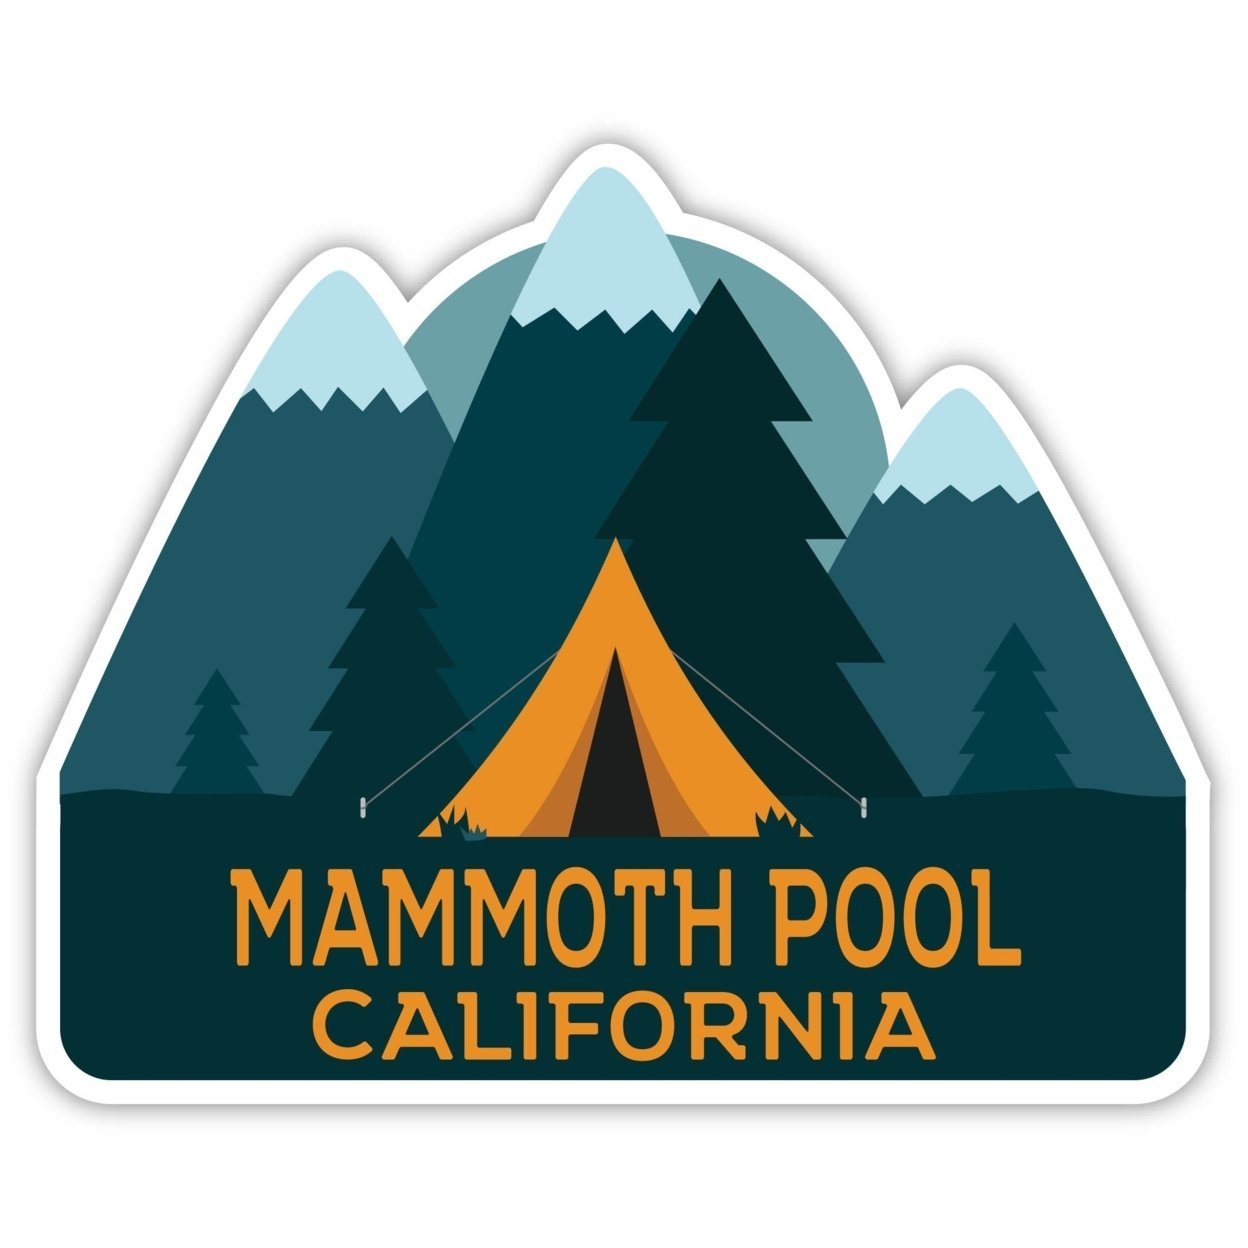 Mammoth Pool California Souvenir Decorative Stickers (Choose Theme And Size) - 4-Inch, Tent